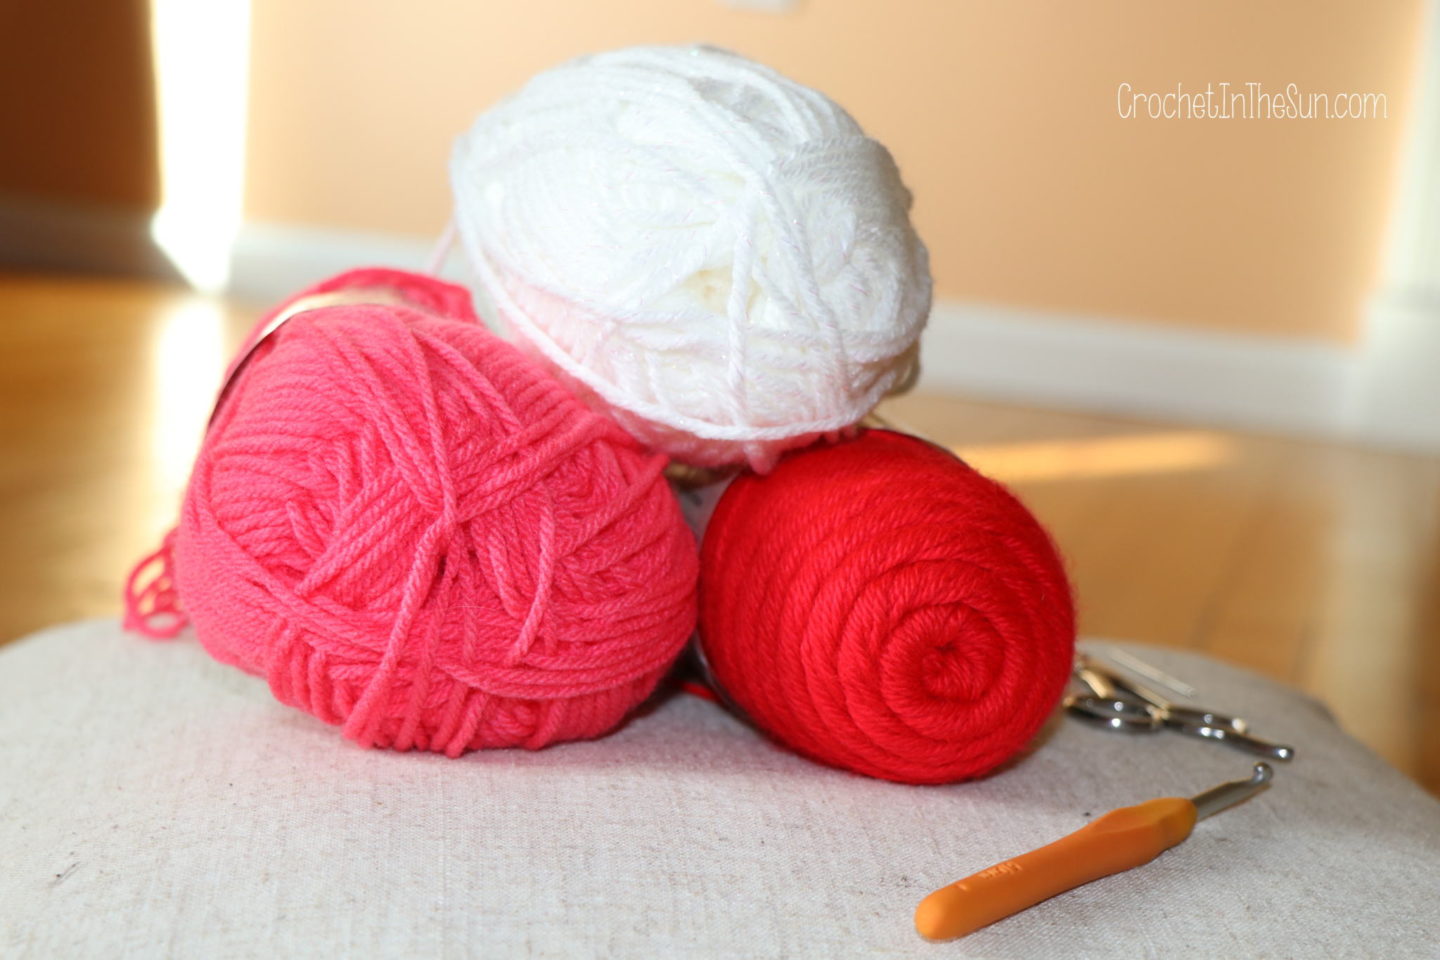 How to crochet hearts in 9 easy steps. 3 yarns. mix and match, repeat!